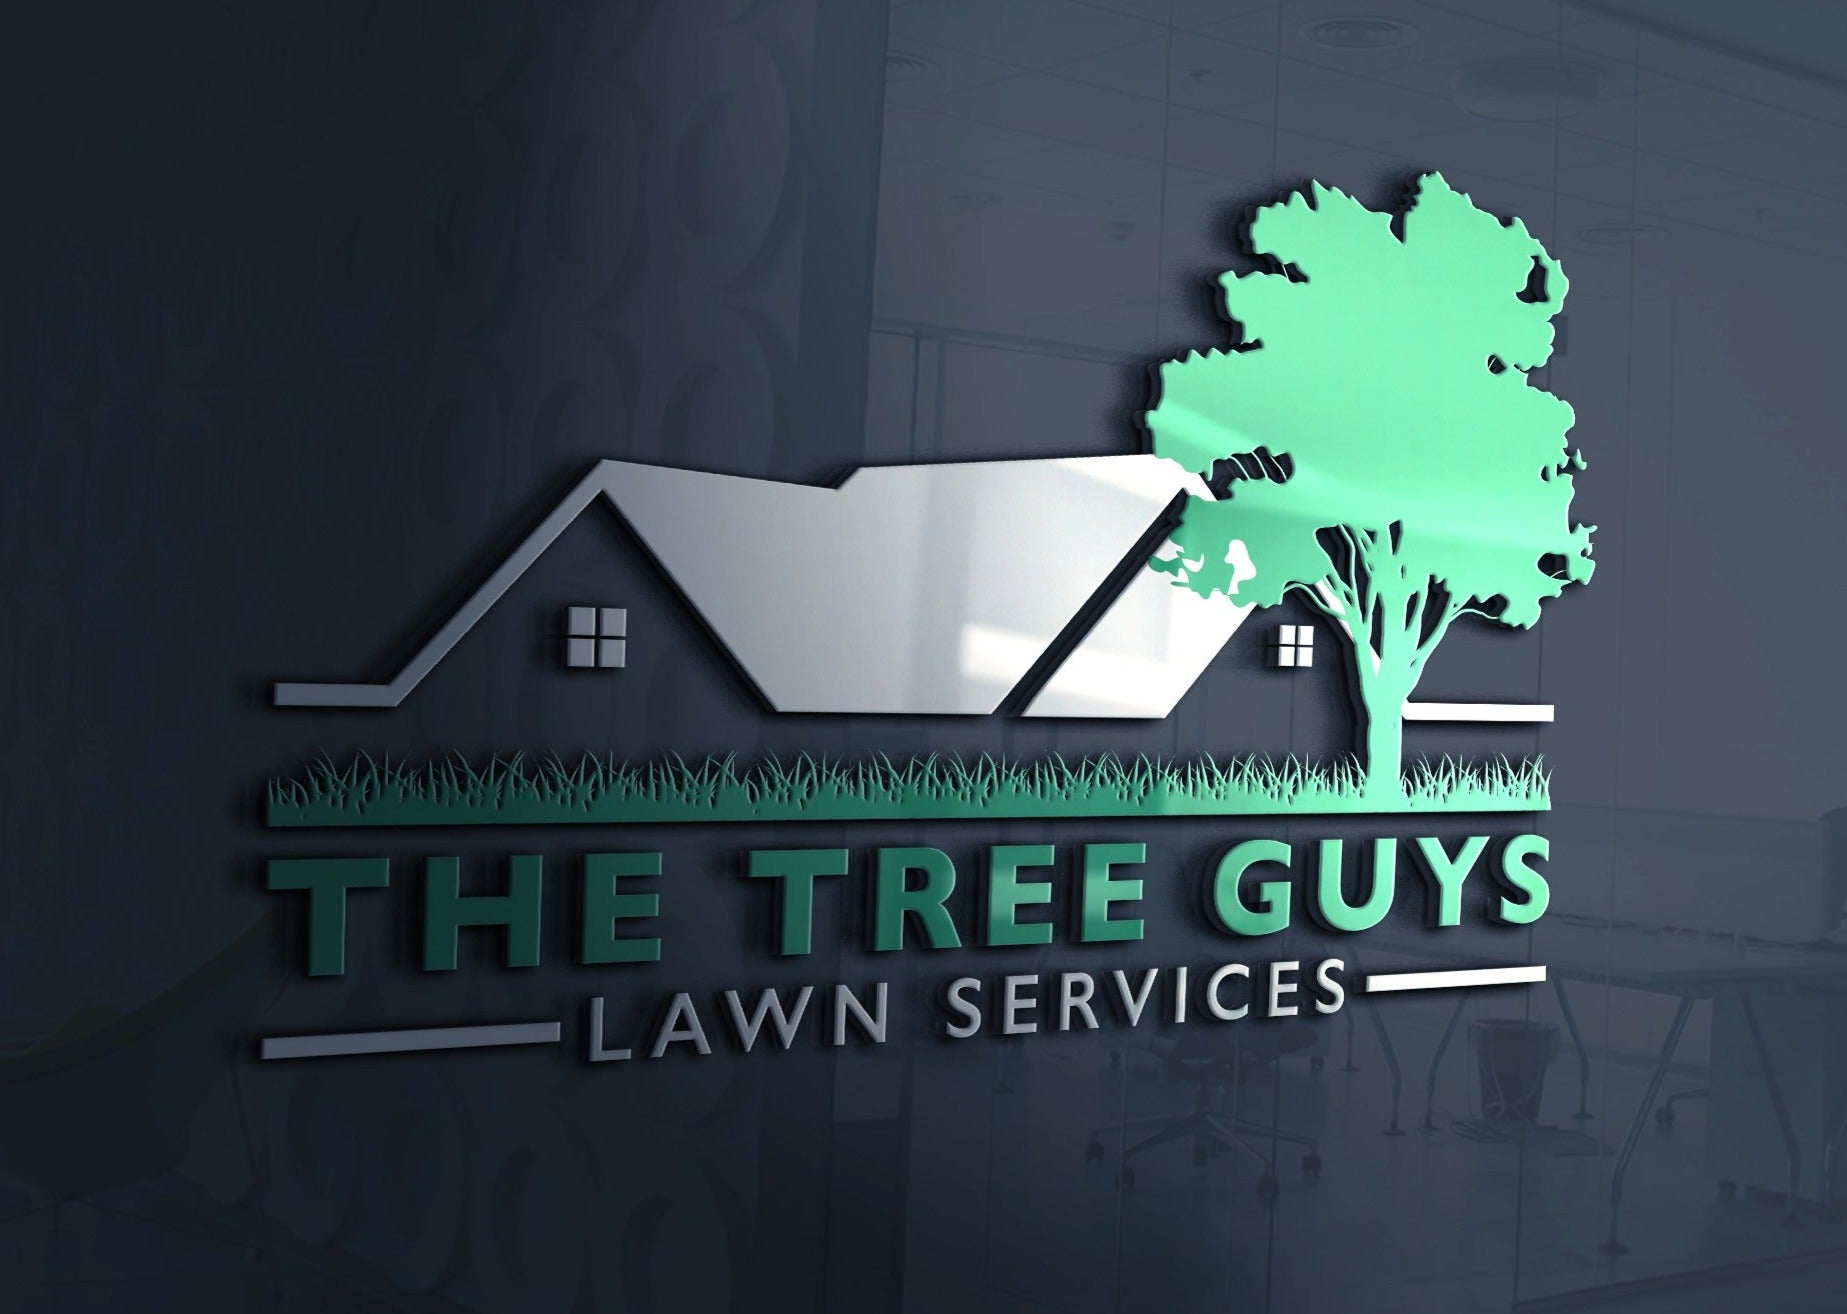 Logo Design - Landscaping Business | Lawn Care Company | Lawn Maintenance | Tree Service | Pine Tree